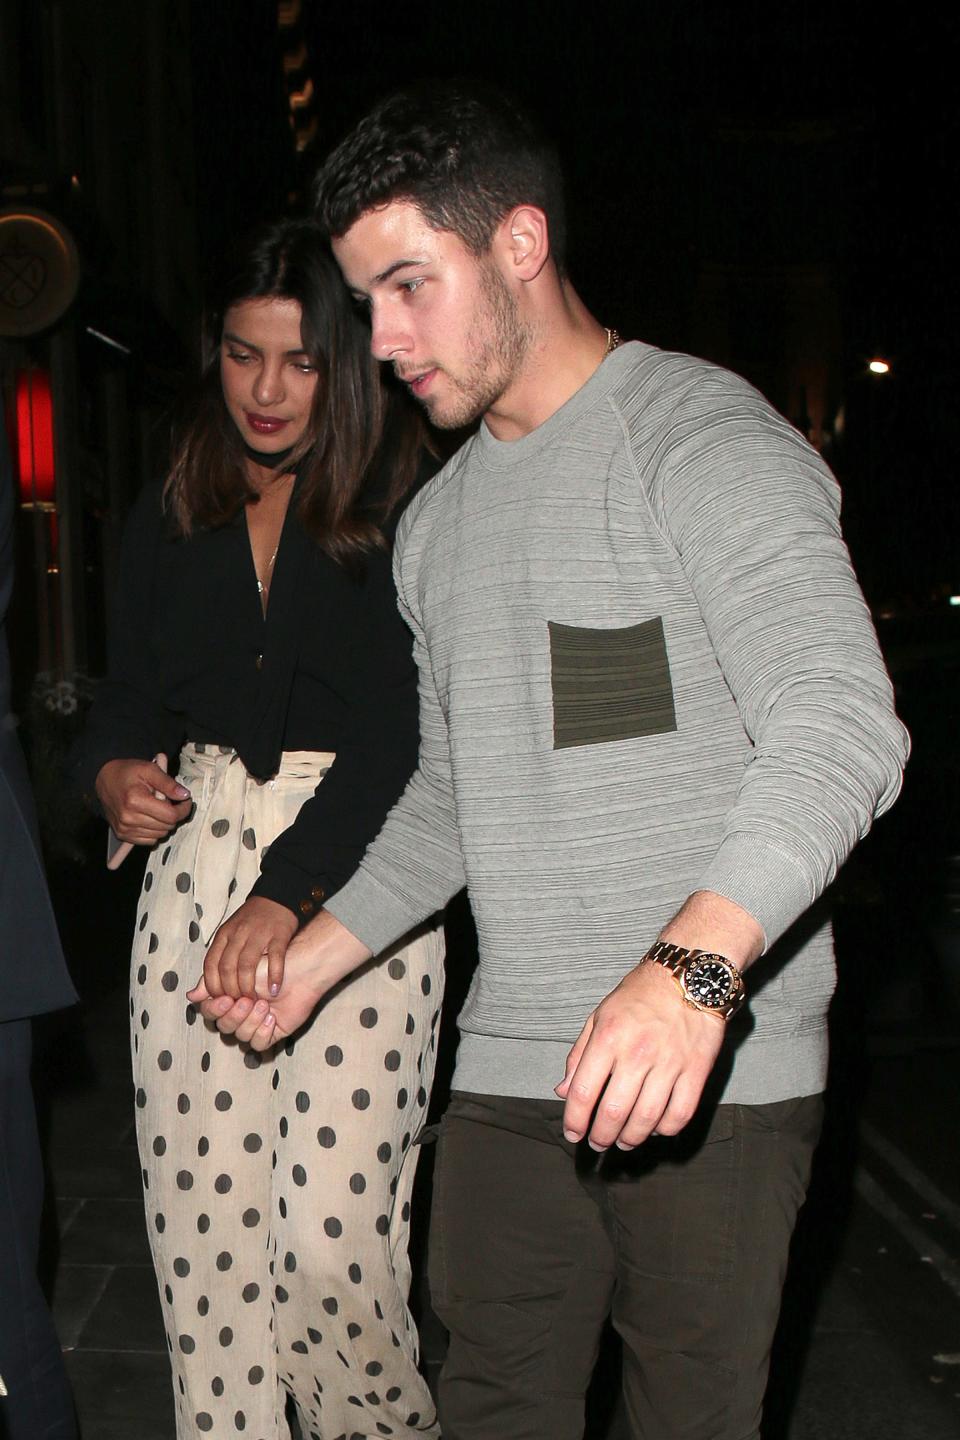 According to new reports, Priyanka Chopra and Nick Jonas got engaged in London on her birthday. They've been dating two months.